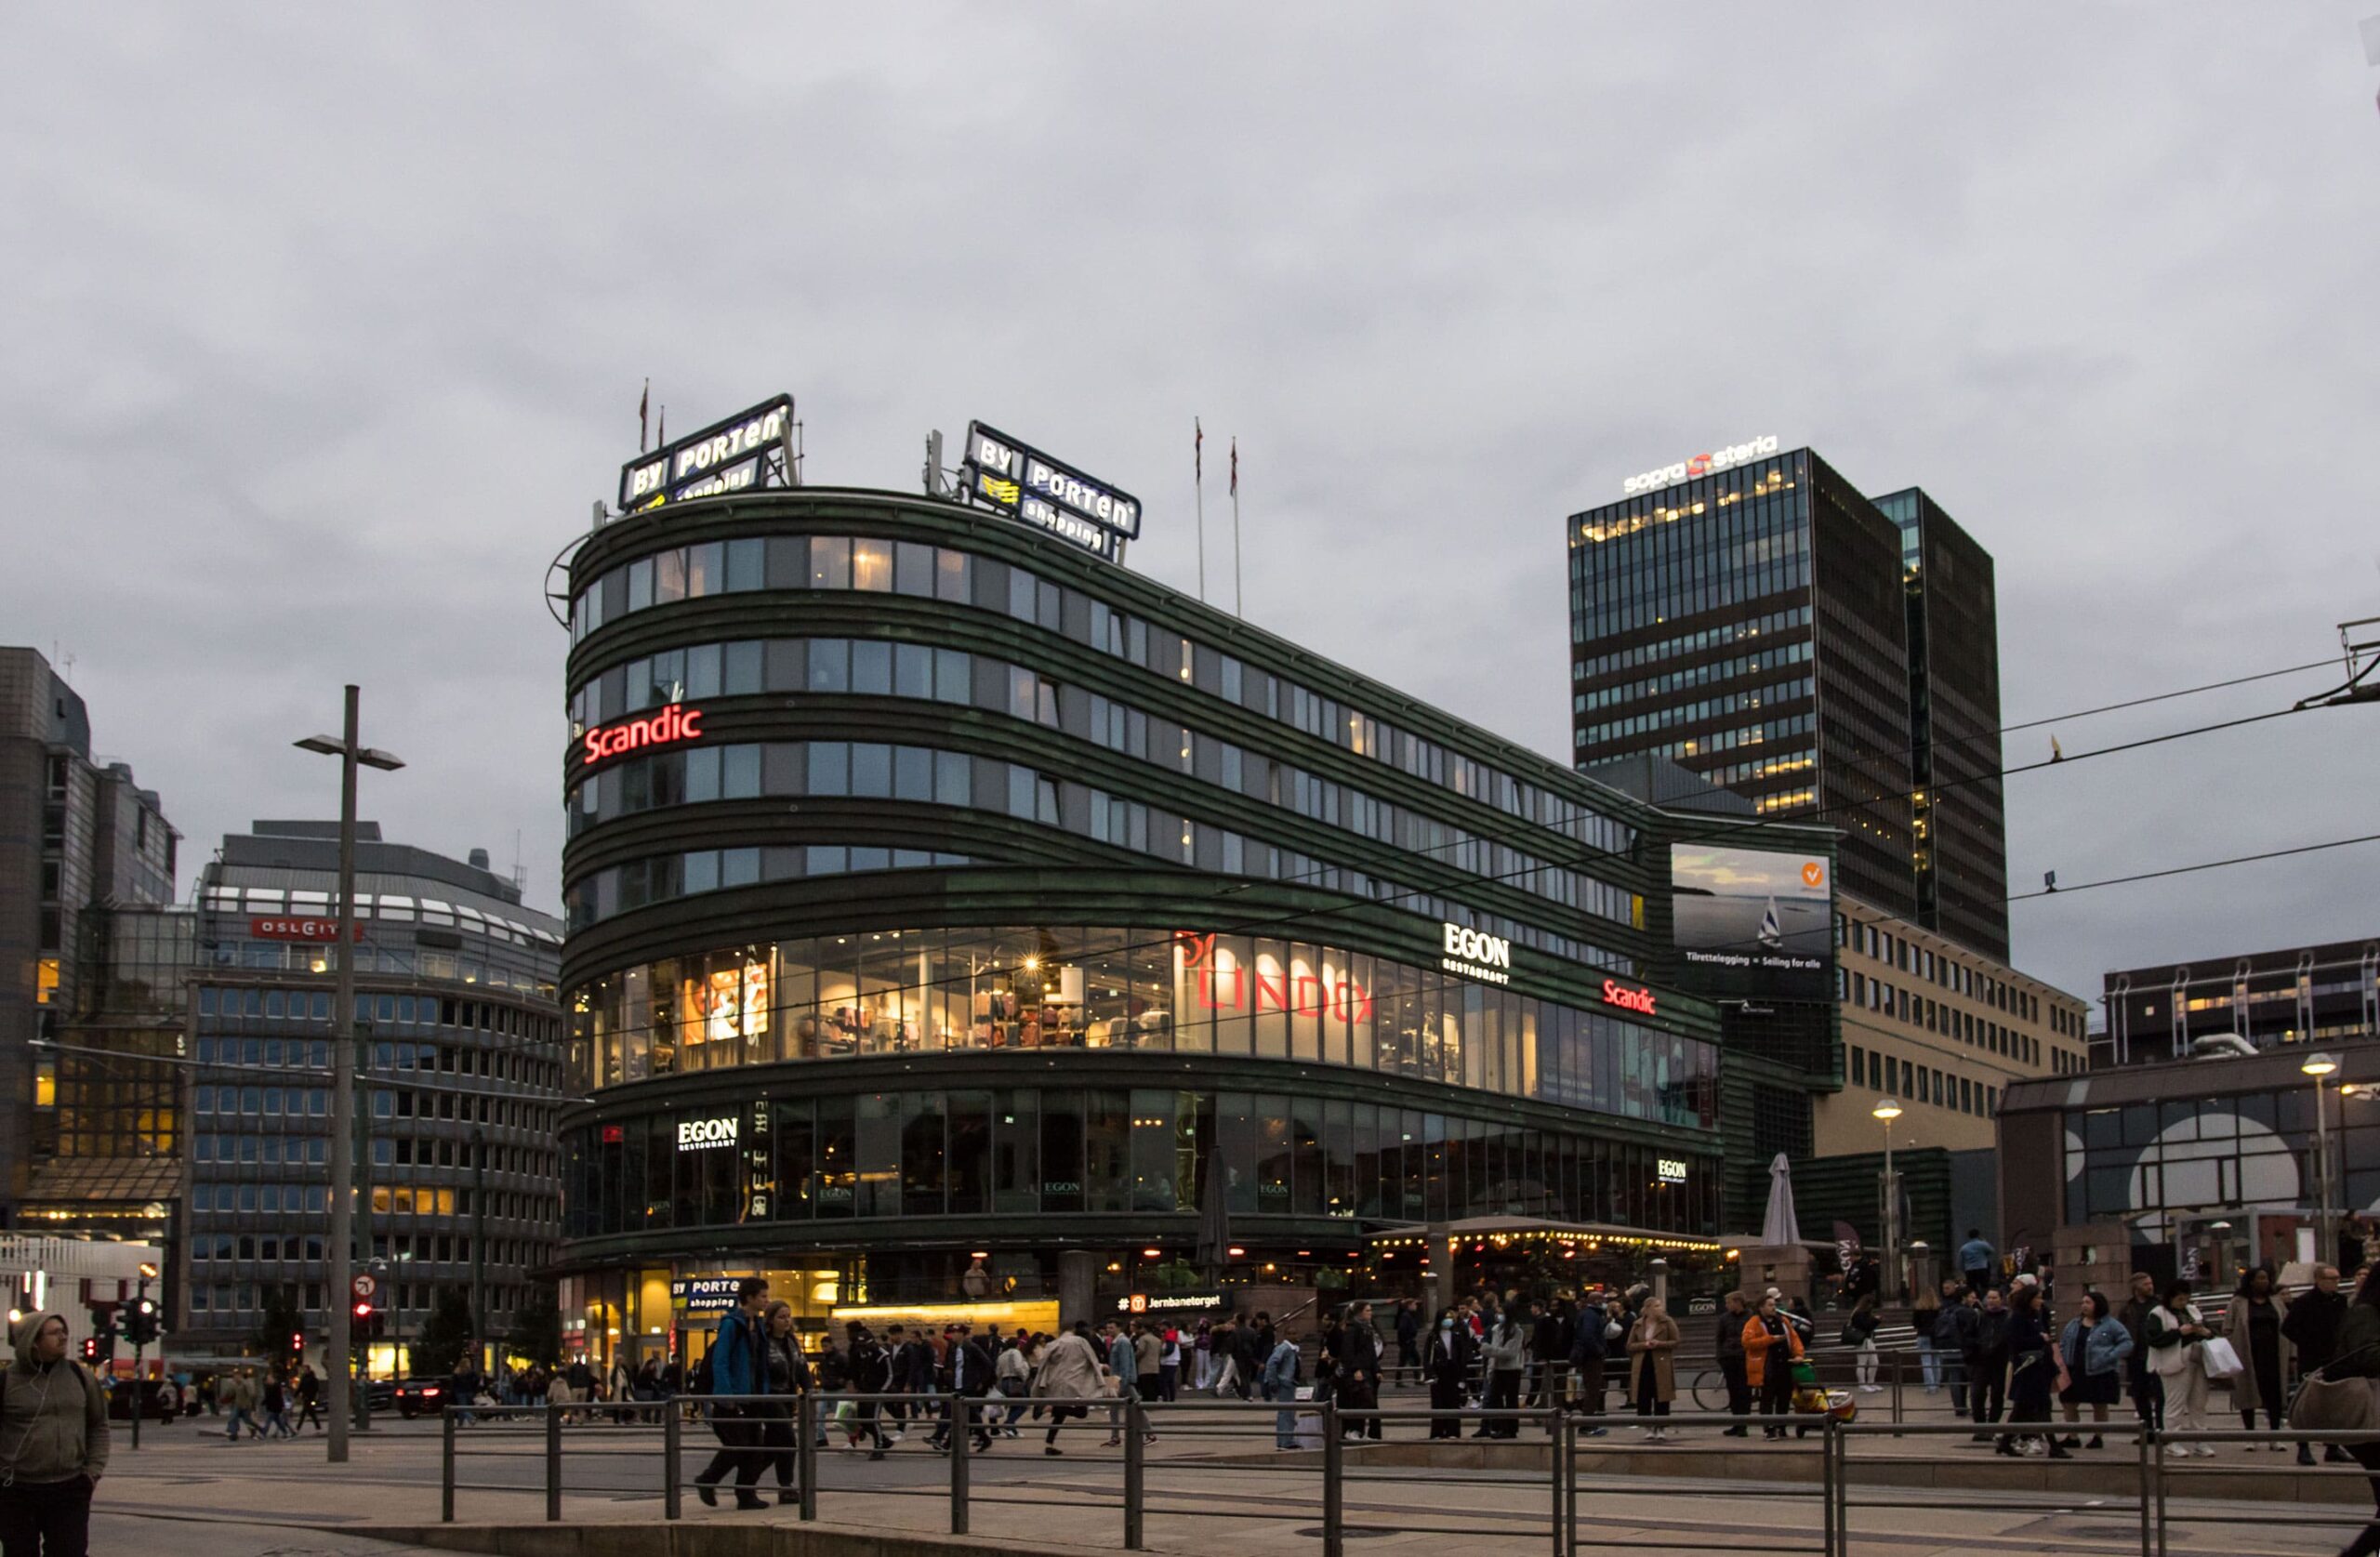 Featured image for “Byporten Mall of Oslo”